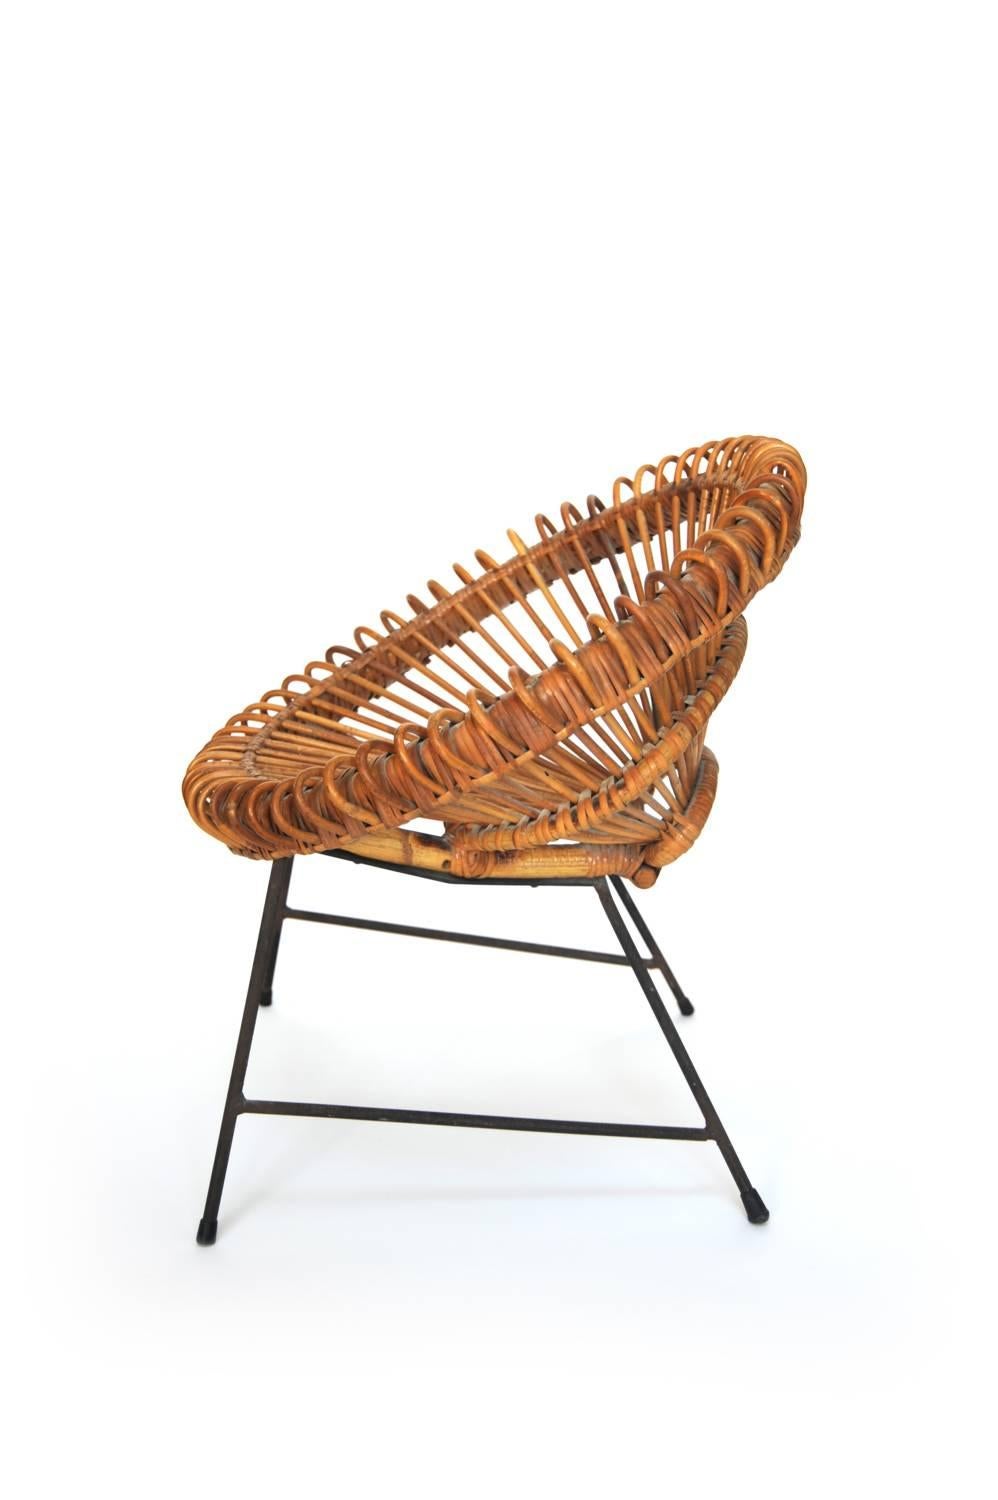 Round Rattan Albini Child Chair, Italy, 1950s

Attributed to Franco Albini
Vintage, Italy, 1950s
Rattan and Iron
H 23 in, W 20 in, D 13 in (seat: H 12.5 in)

From a private child chair collection